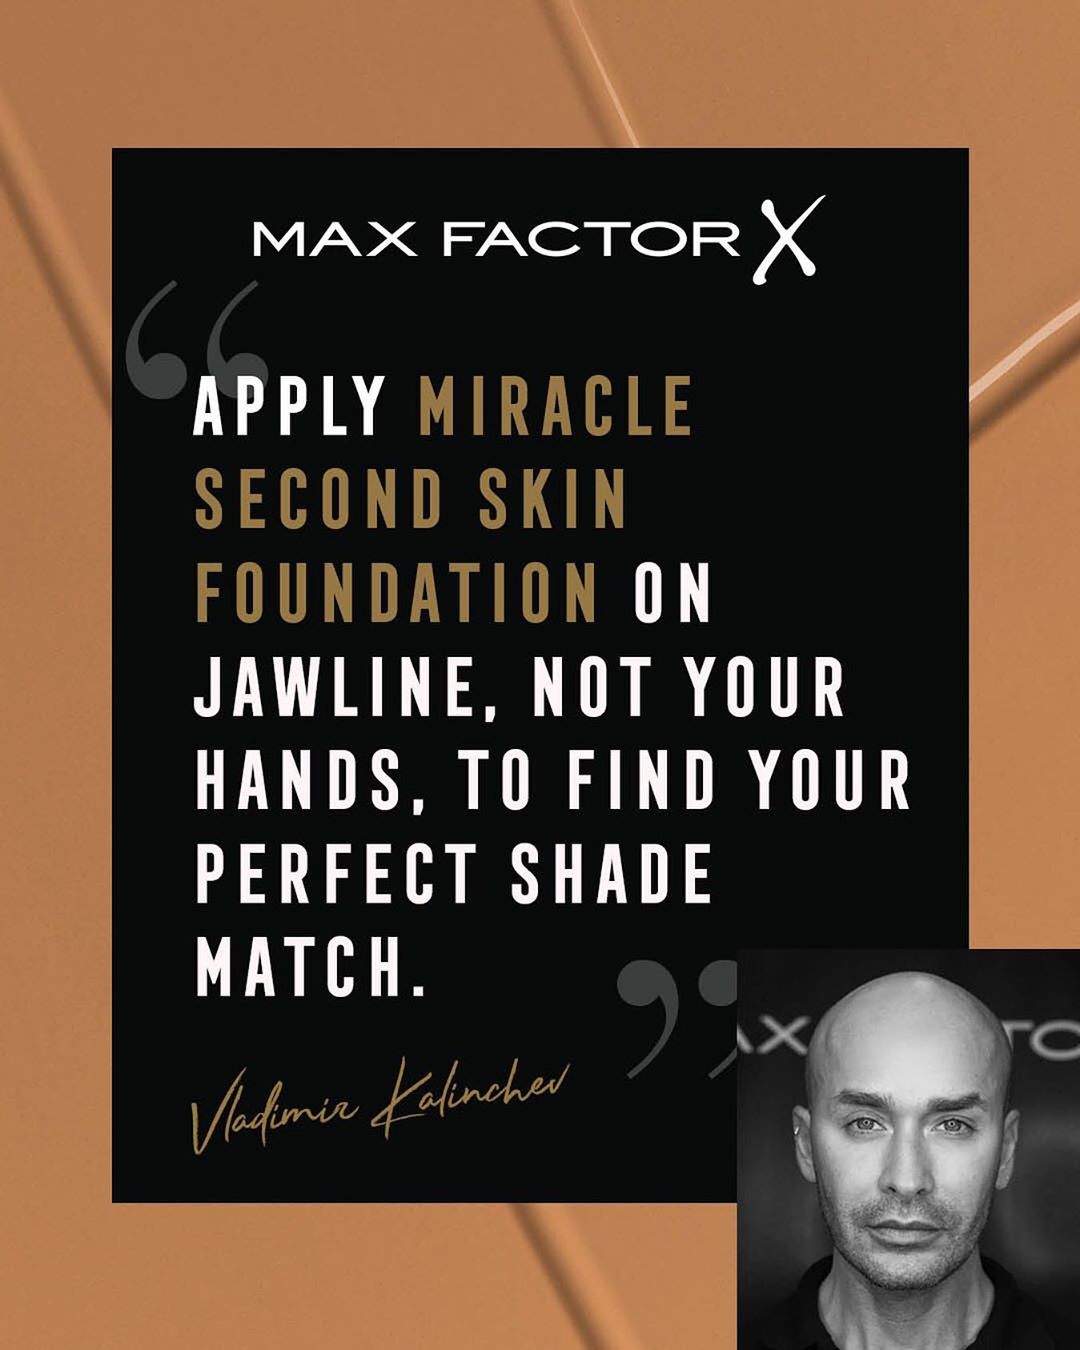 Max Factor - We love a good makeup artist tip for our Miracle Second Skin foundation! What is your favorite way to apply?

#MiracleSecondSkin
#MaxFactorFoundation
#sheer #buildable
#lightweight #found...